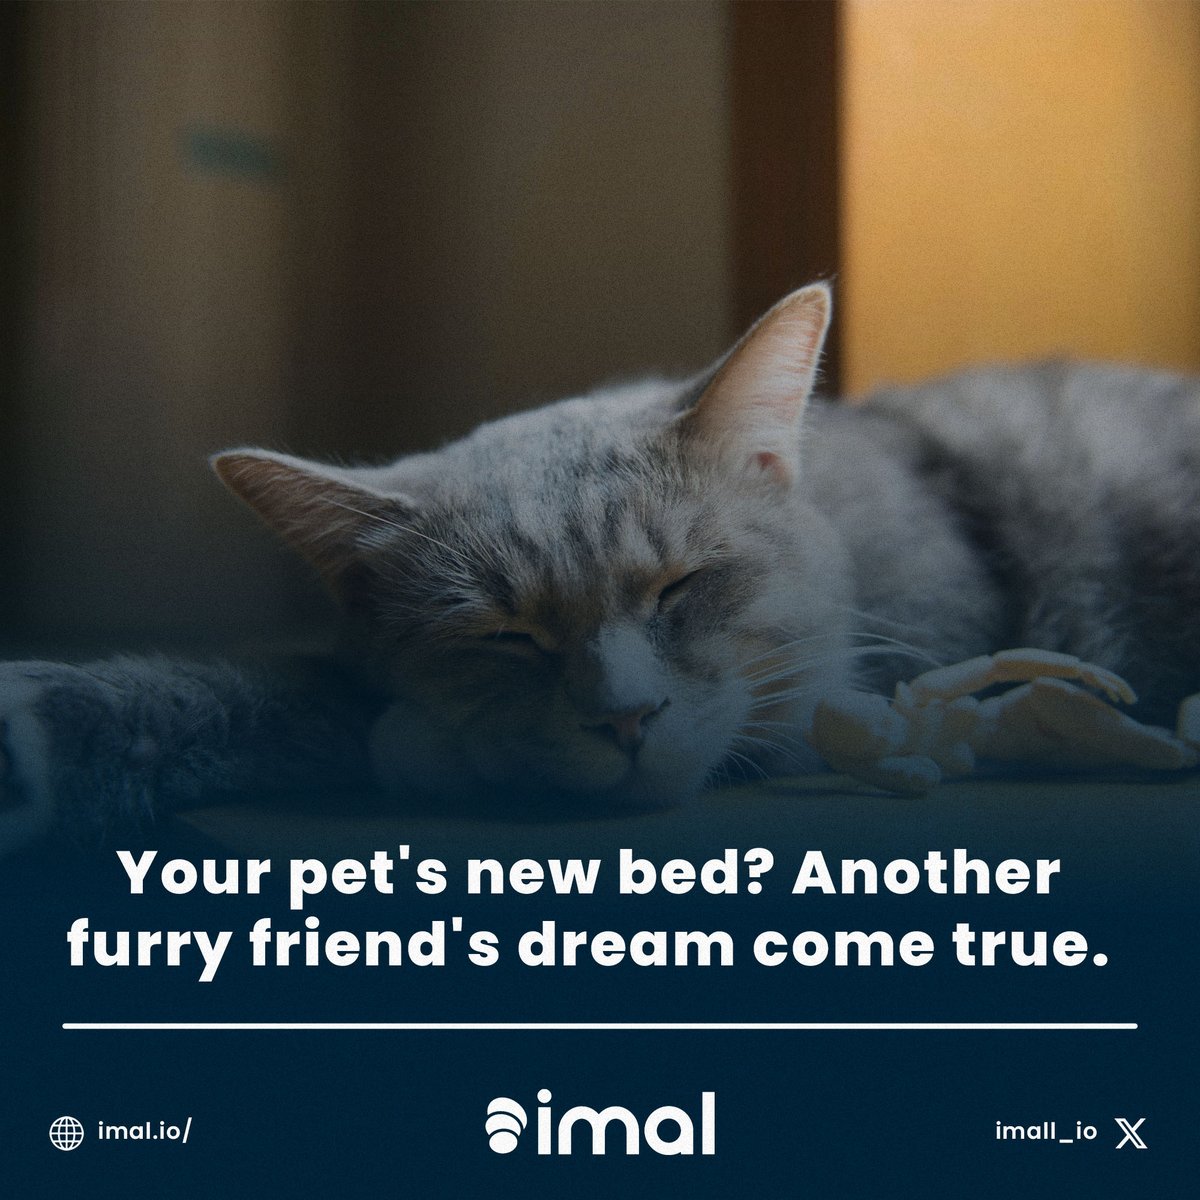 Sunshine and sweet dreams, make a difference with IMAL!